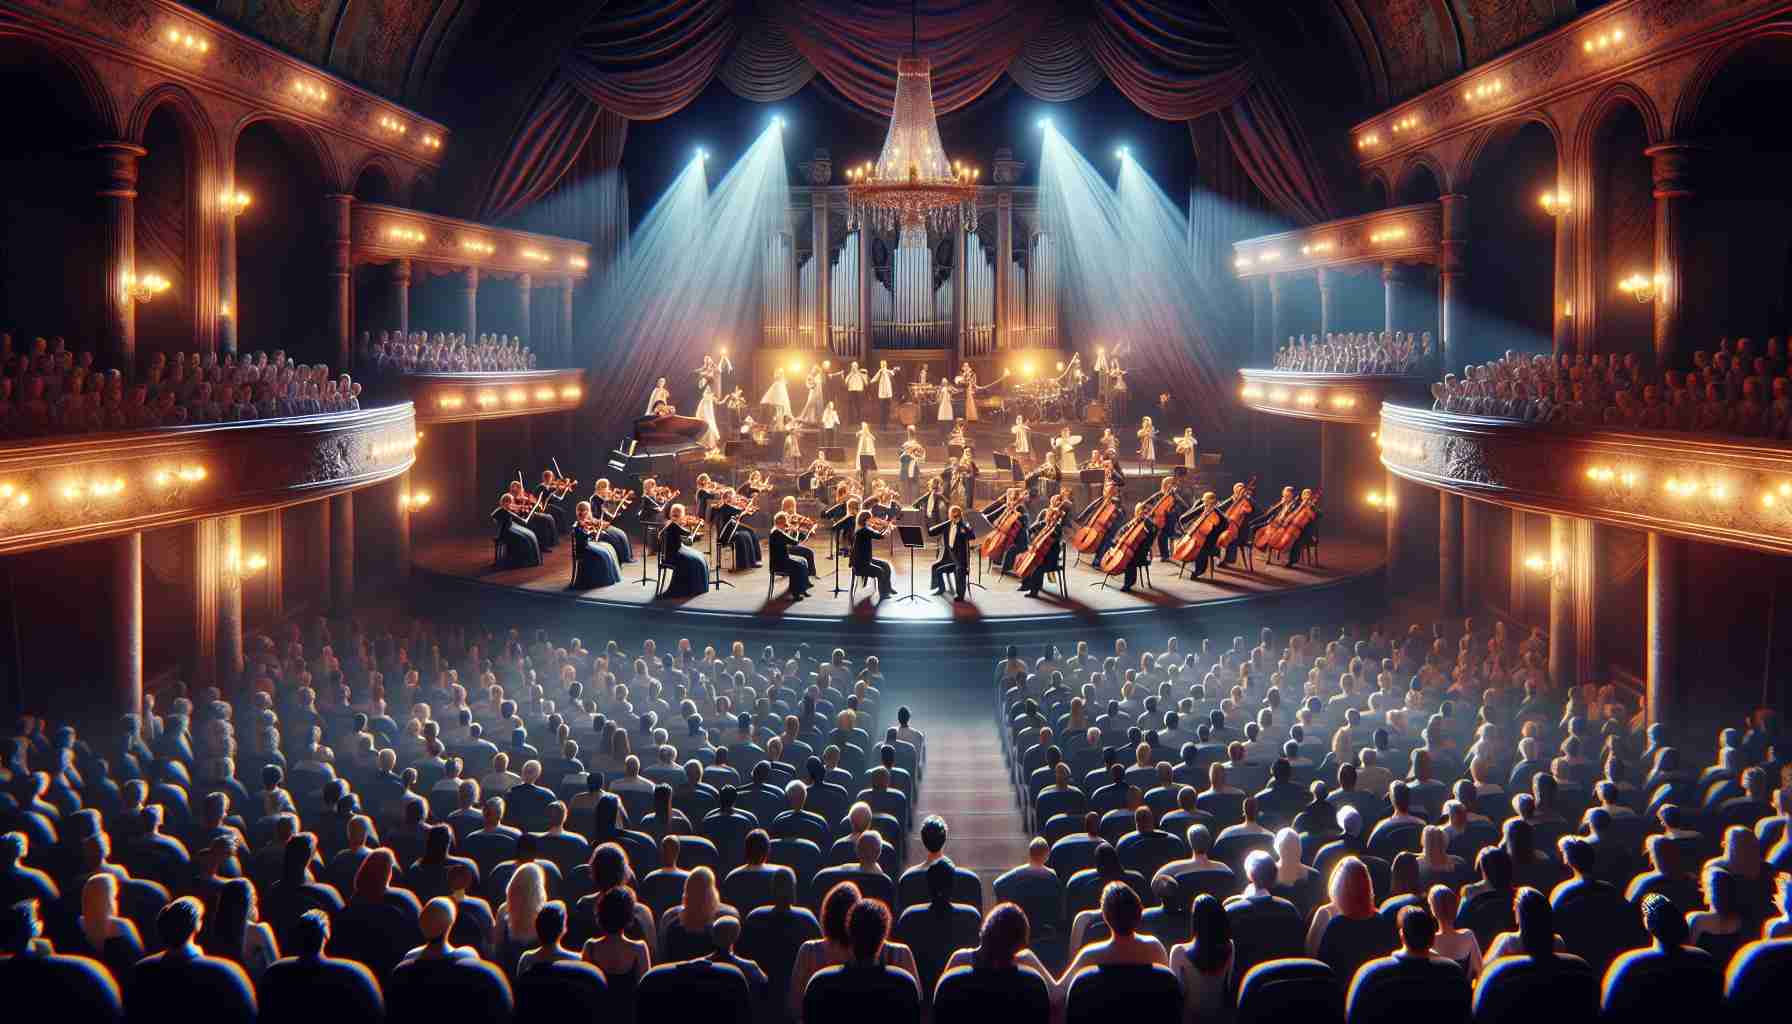 A high definition, realistic image of a thrilling and grand musical extravaganza taking over the stage in a large theater. The scene showcases a spectrum of instruments on the stage with musicians of various descents and genders, elegantly dressed, skillfully playing their parts. The crowd in the front is mesmerized and engrossed in the enchanting music. The stage is adorned with vibrant lights and decor, perfectly complementing the passionate ambiance.